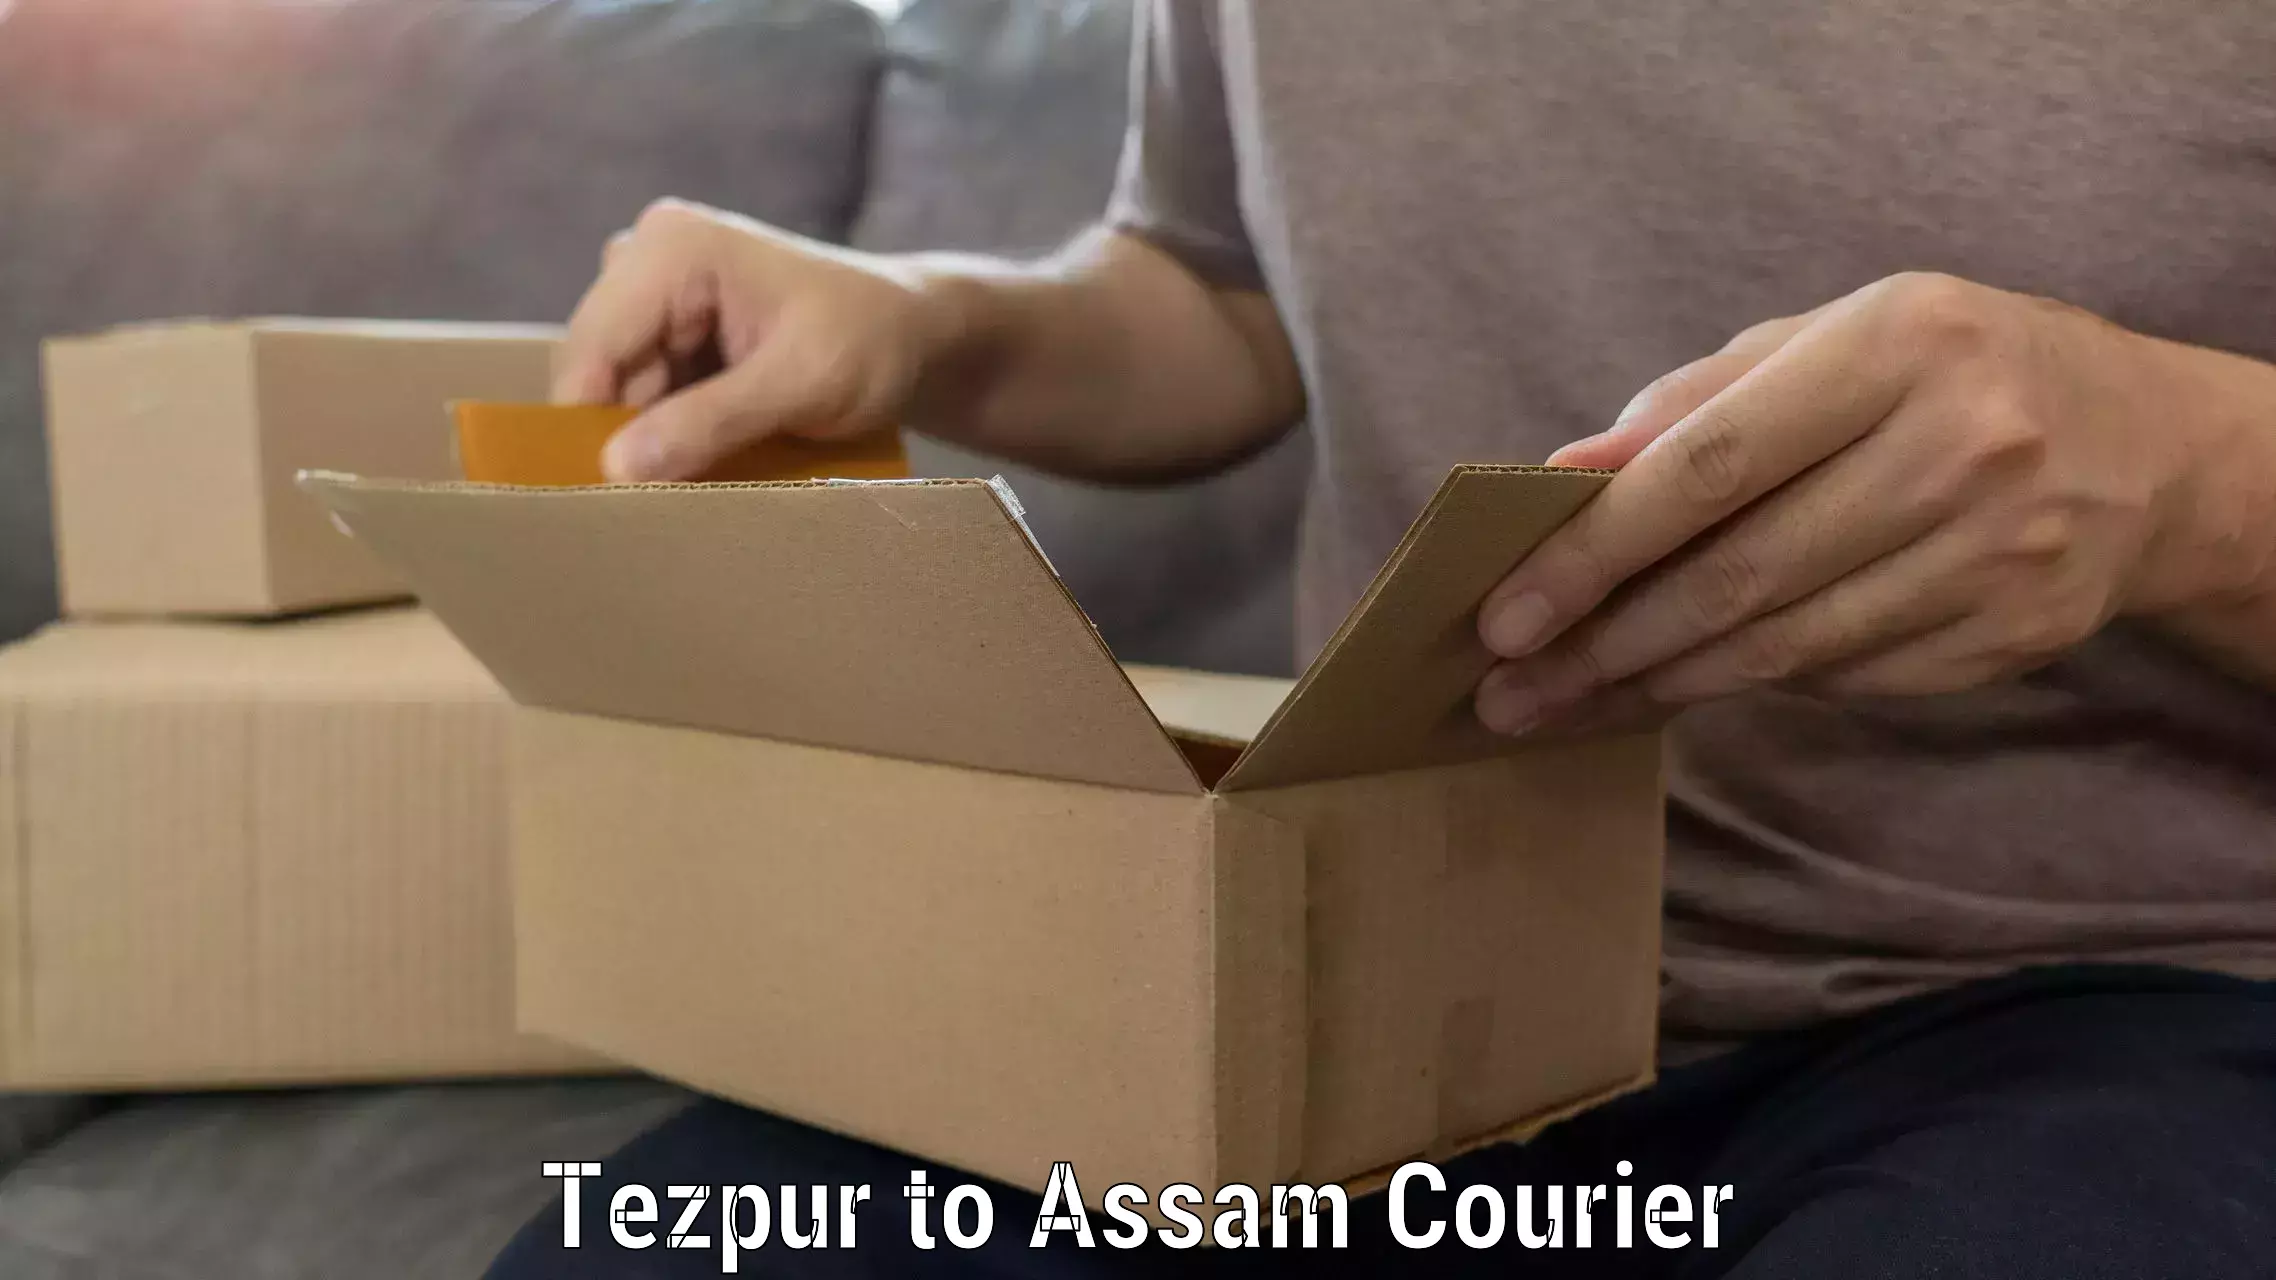 Furniture movers and packers Tezpur to Dibrugarh University